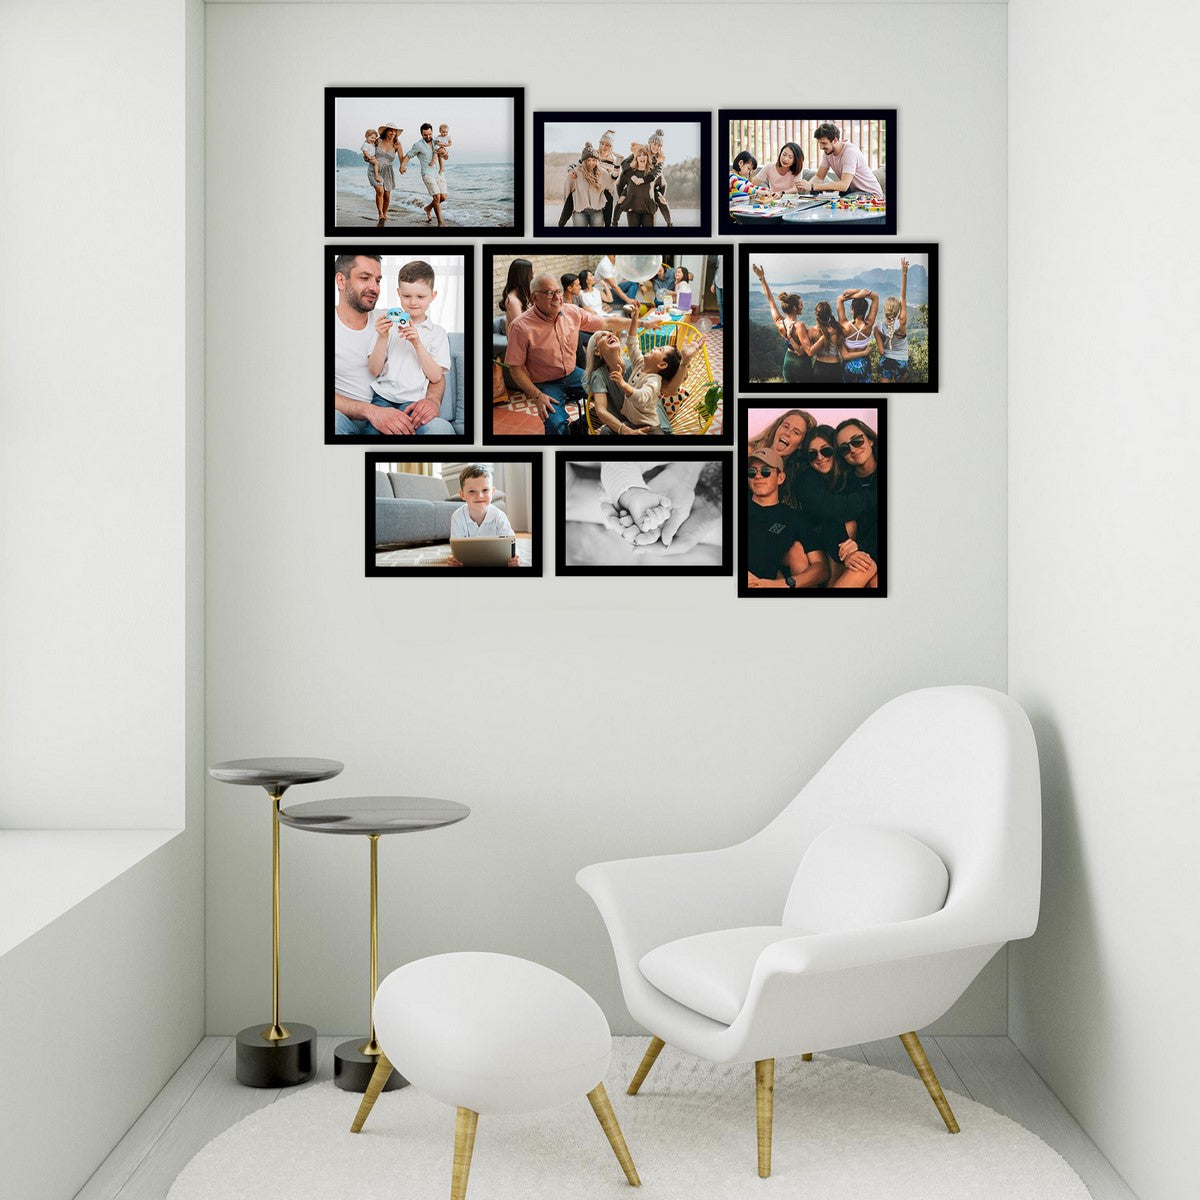 Memory Wall Collage Photo Frame - Set of 9 Photo Frames for 4 Photos of 5"x7", 4 Photos of 6"x8", 1 Photos of 8"x10" 2